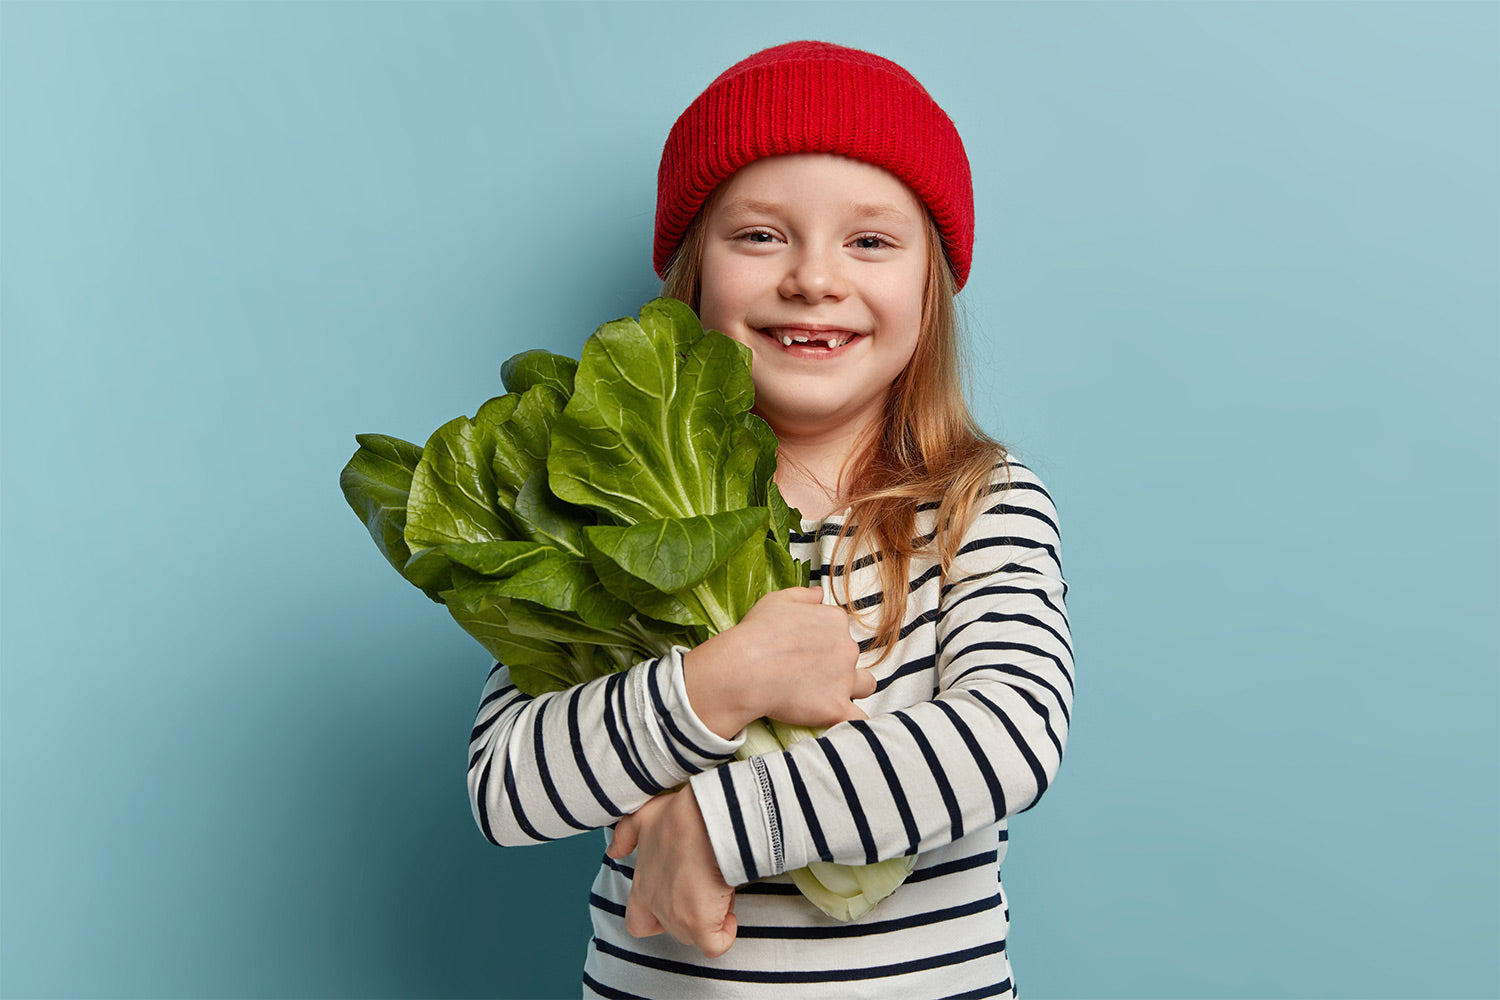 Young girl holding a bundle of lettuce